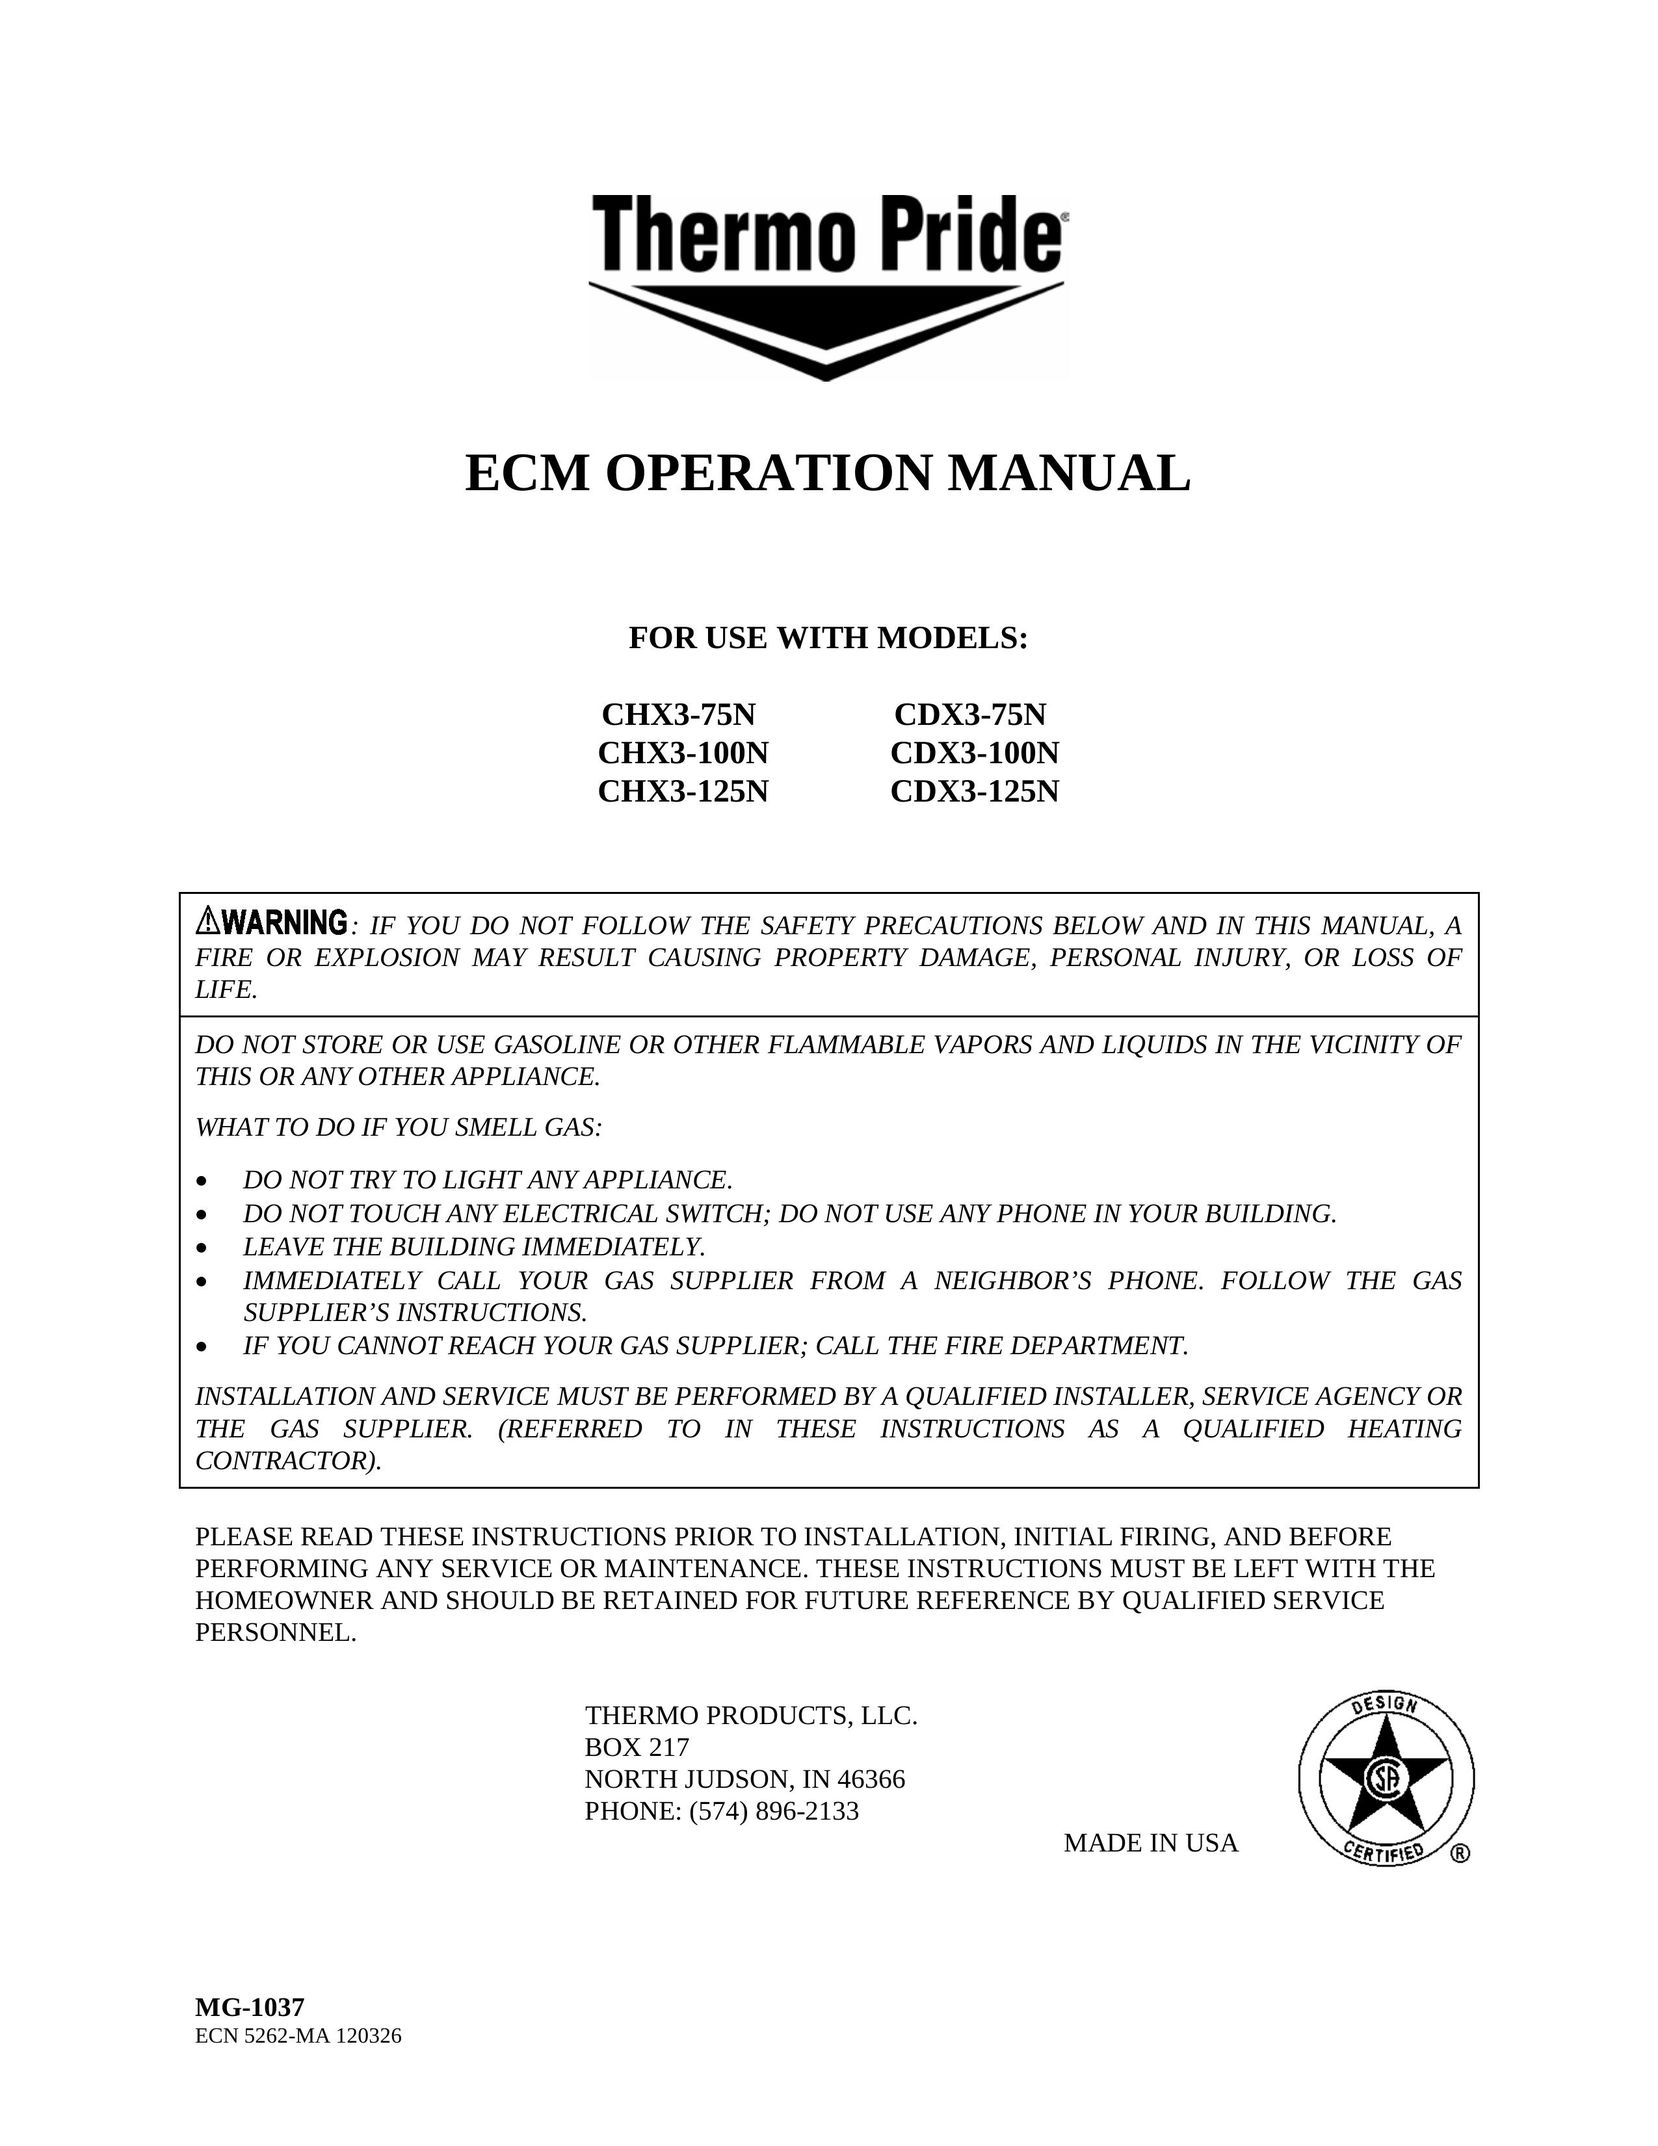 Thermo Products CDX3-100N Furnace User Manual